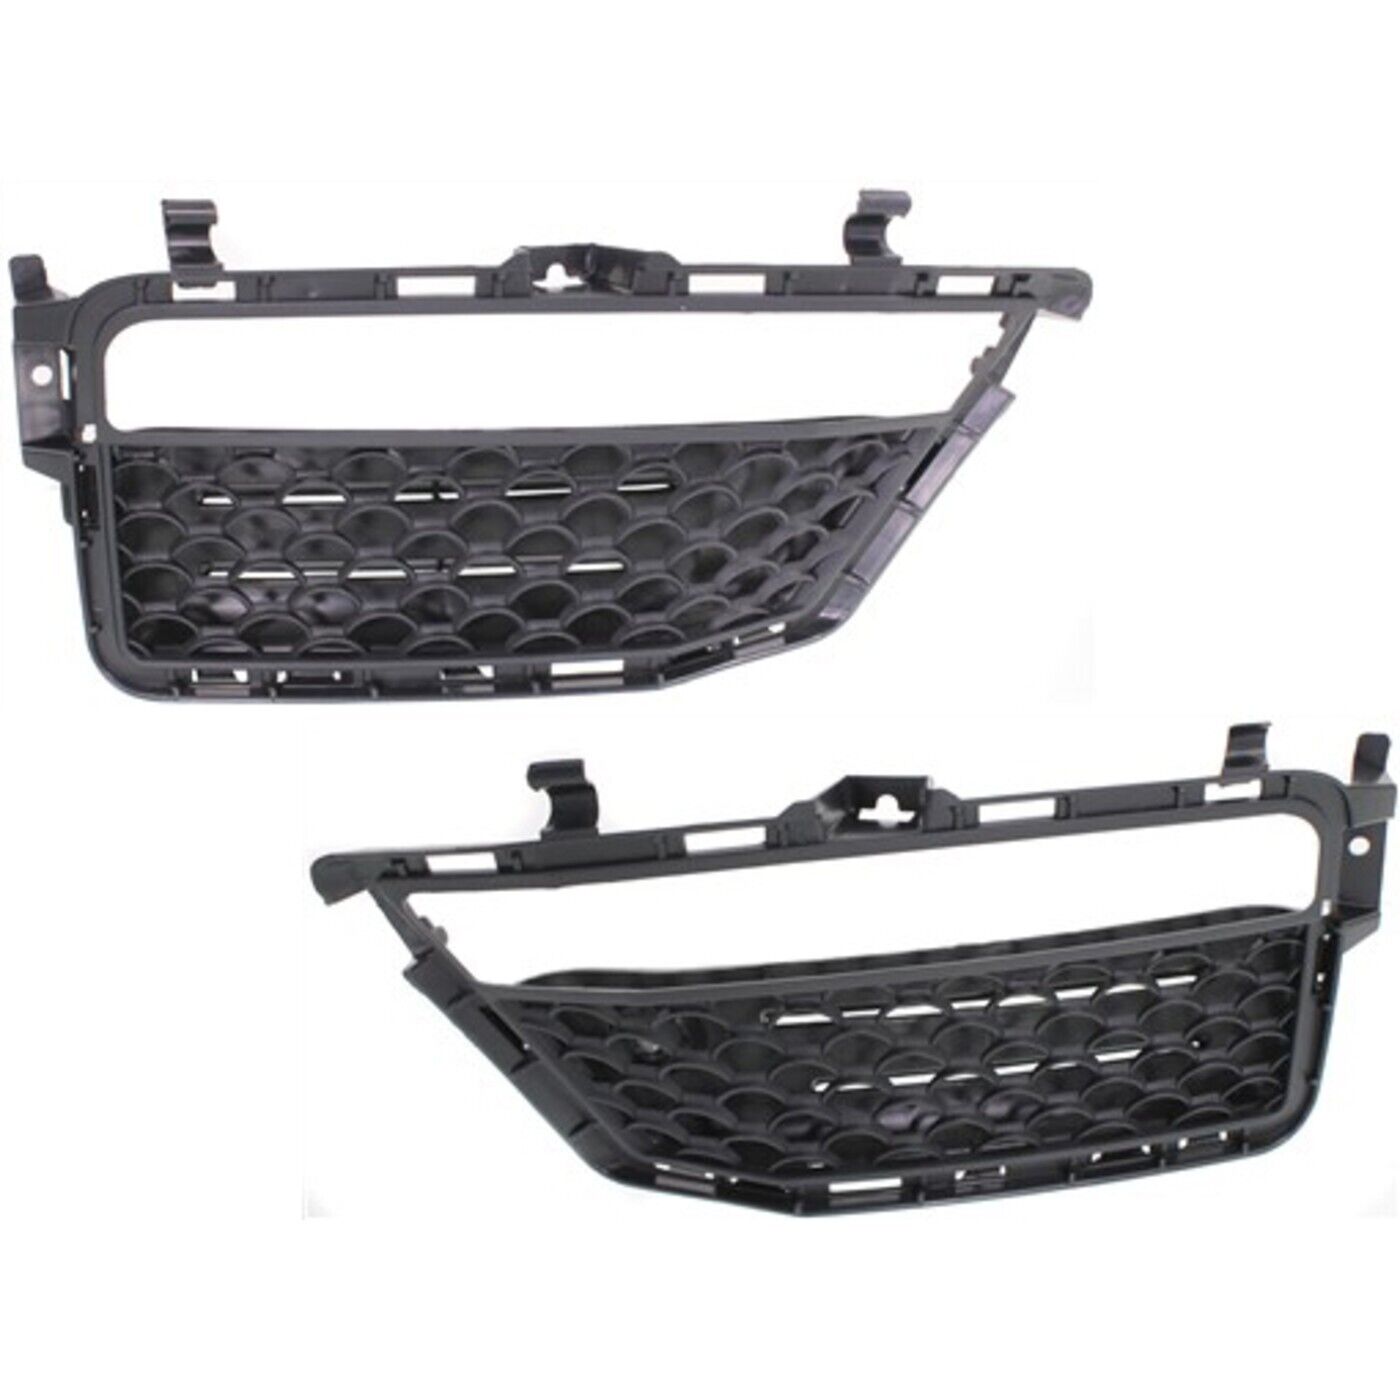 Bumper Grille For 2010-2013 Mercedes Benz E63 AMG Set of 2 Left & Right Plastic